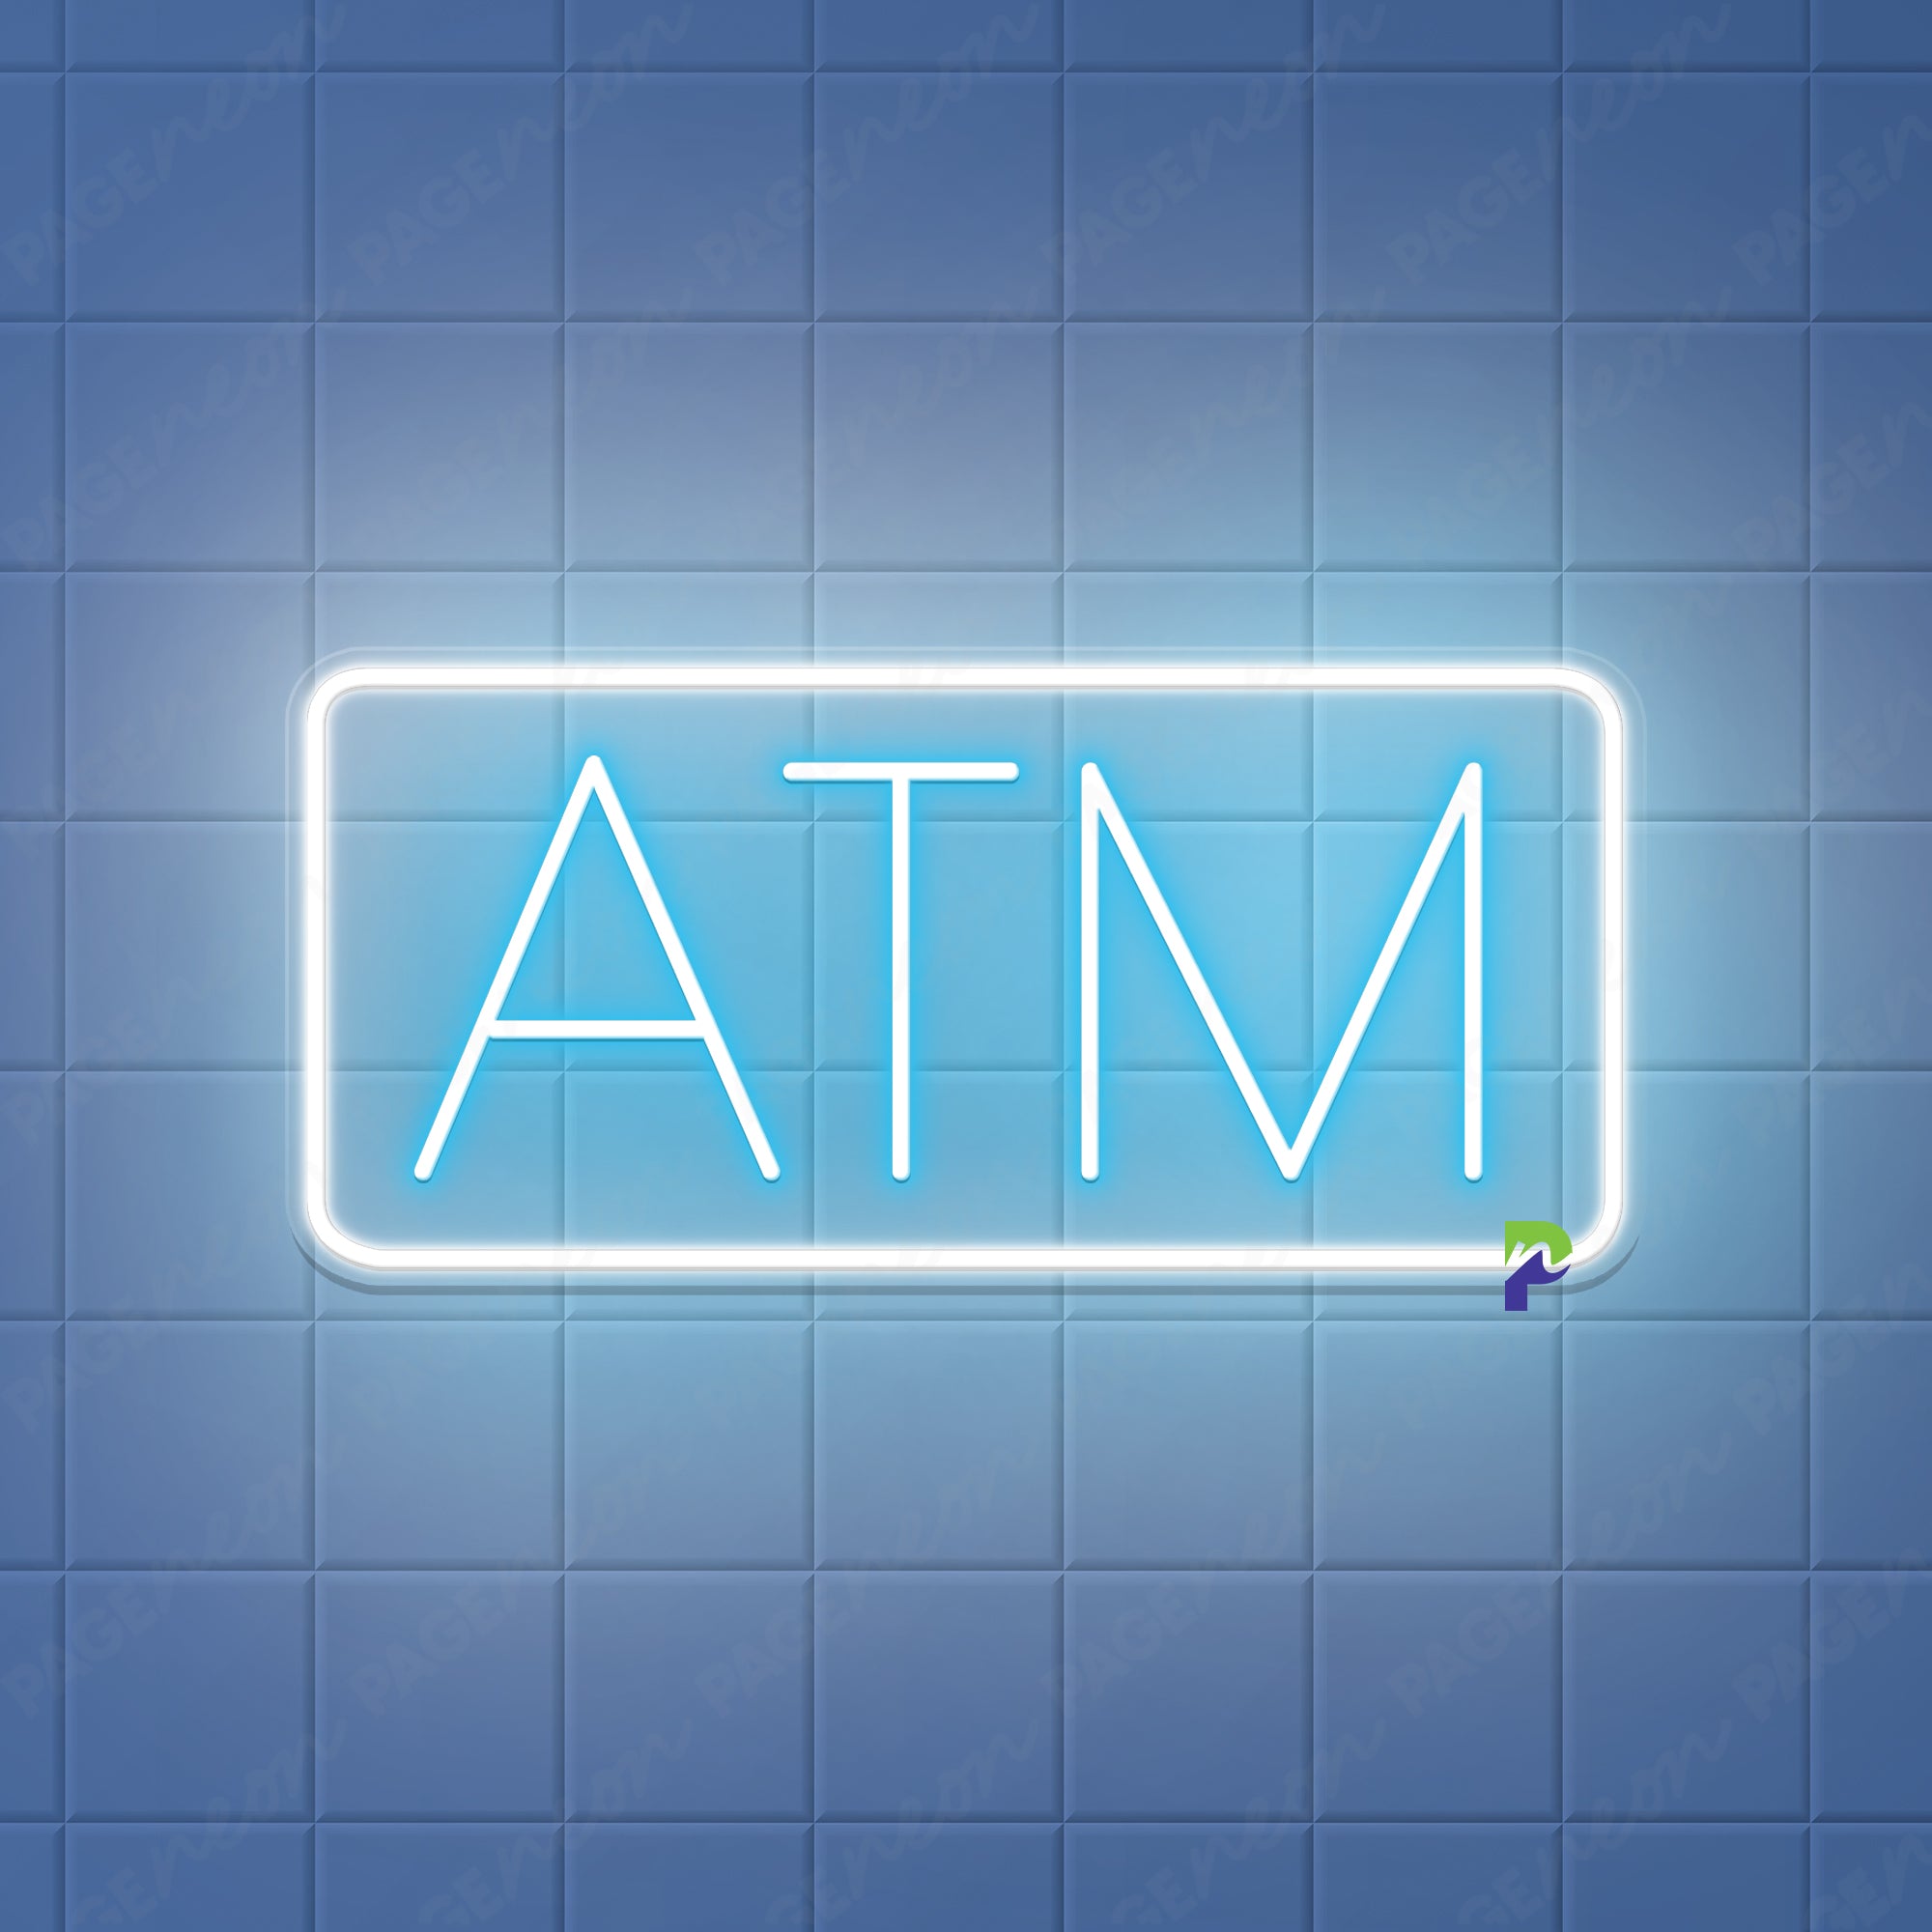 ATM Neon Sign Simple Led Light